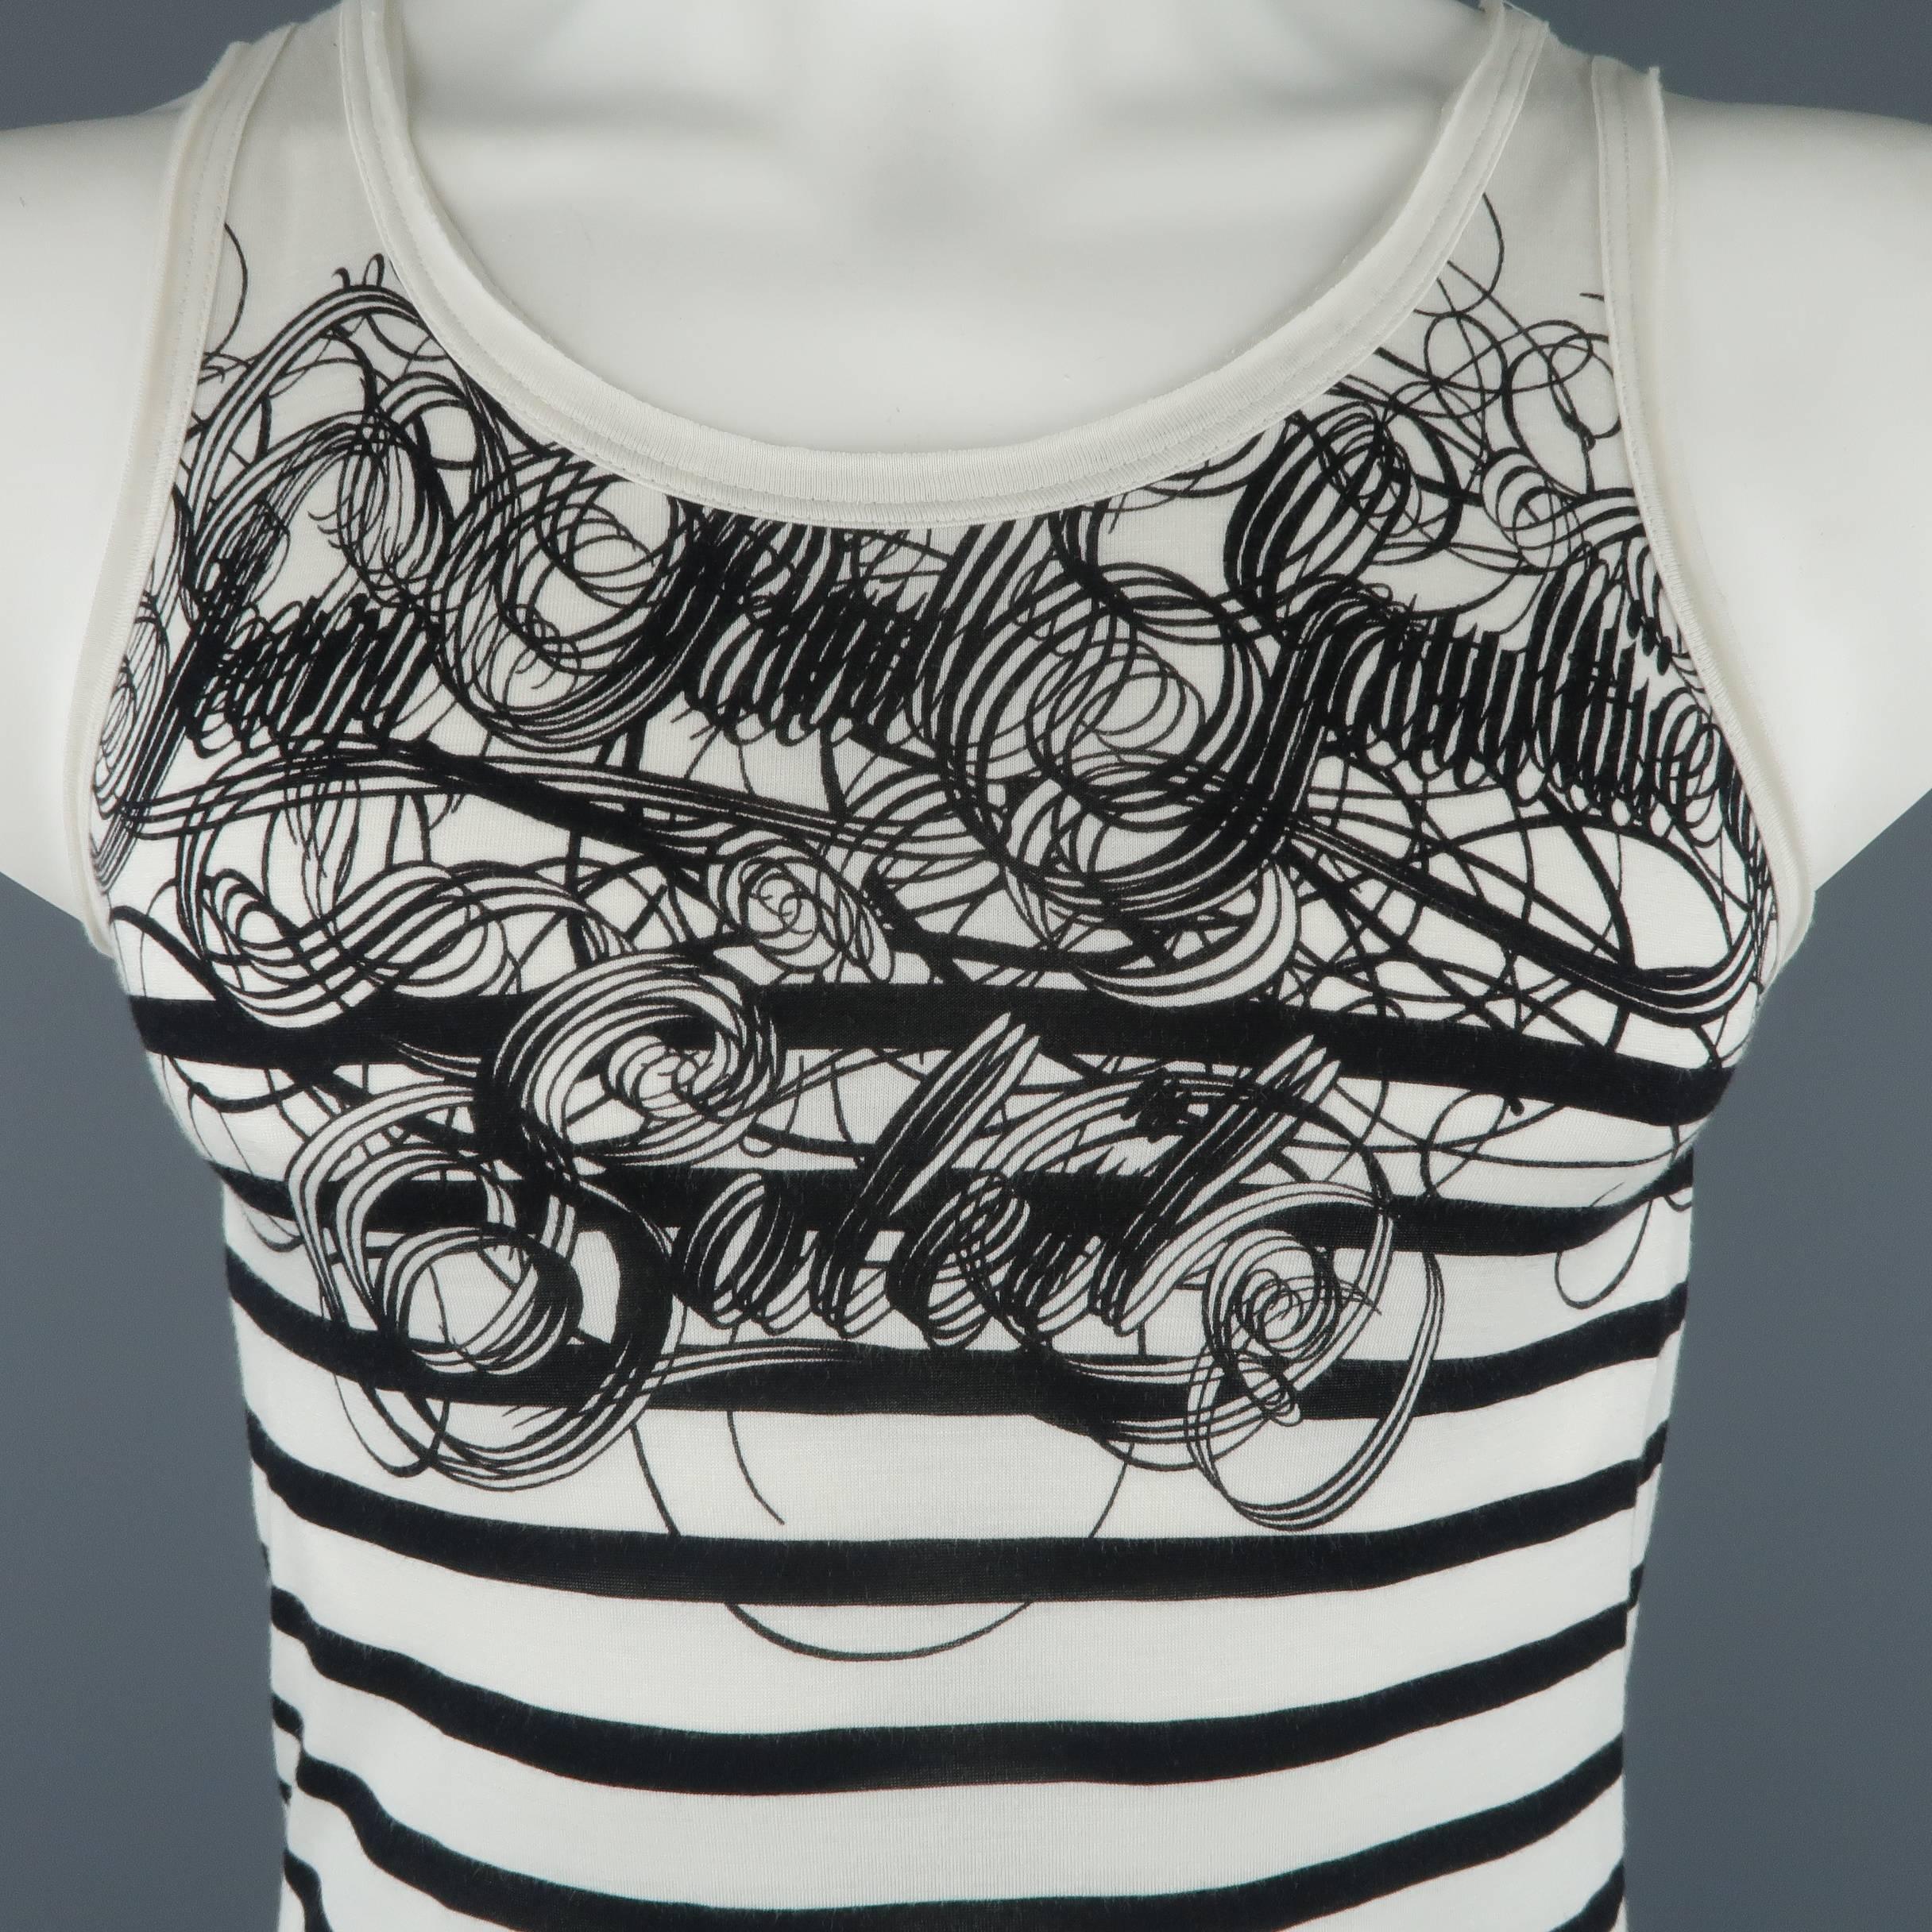 JEAN PAUL GAULTIER tank top comes in black and white striped burnout jersey with frayed trim and SOLEIL logo. Made in Italy.
 
Good Pre-Owned Condition.
Marked: L
 
Measurements:
 
Shoulder: 14 in.
Chest: 36 in.
Length: 29 in.
